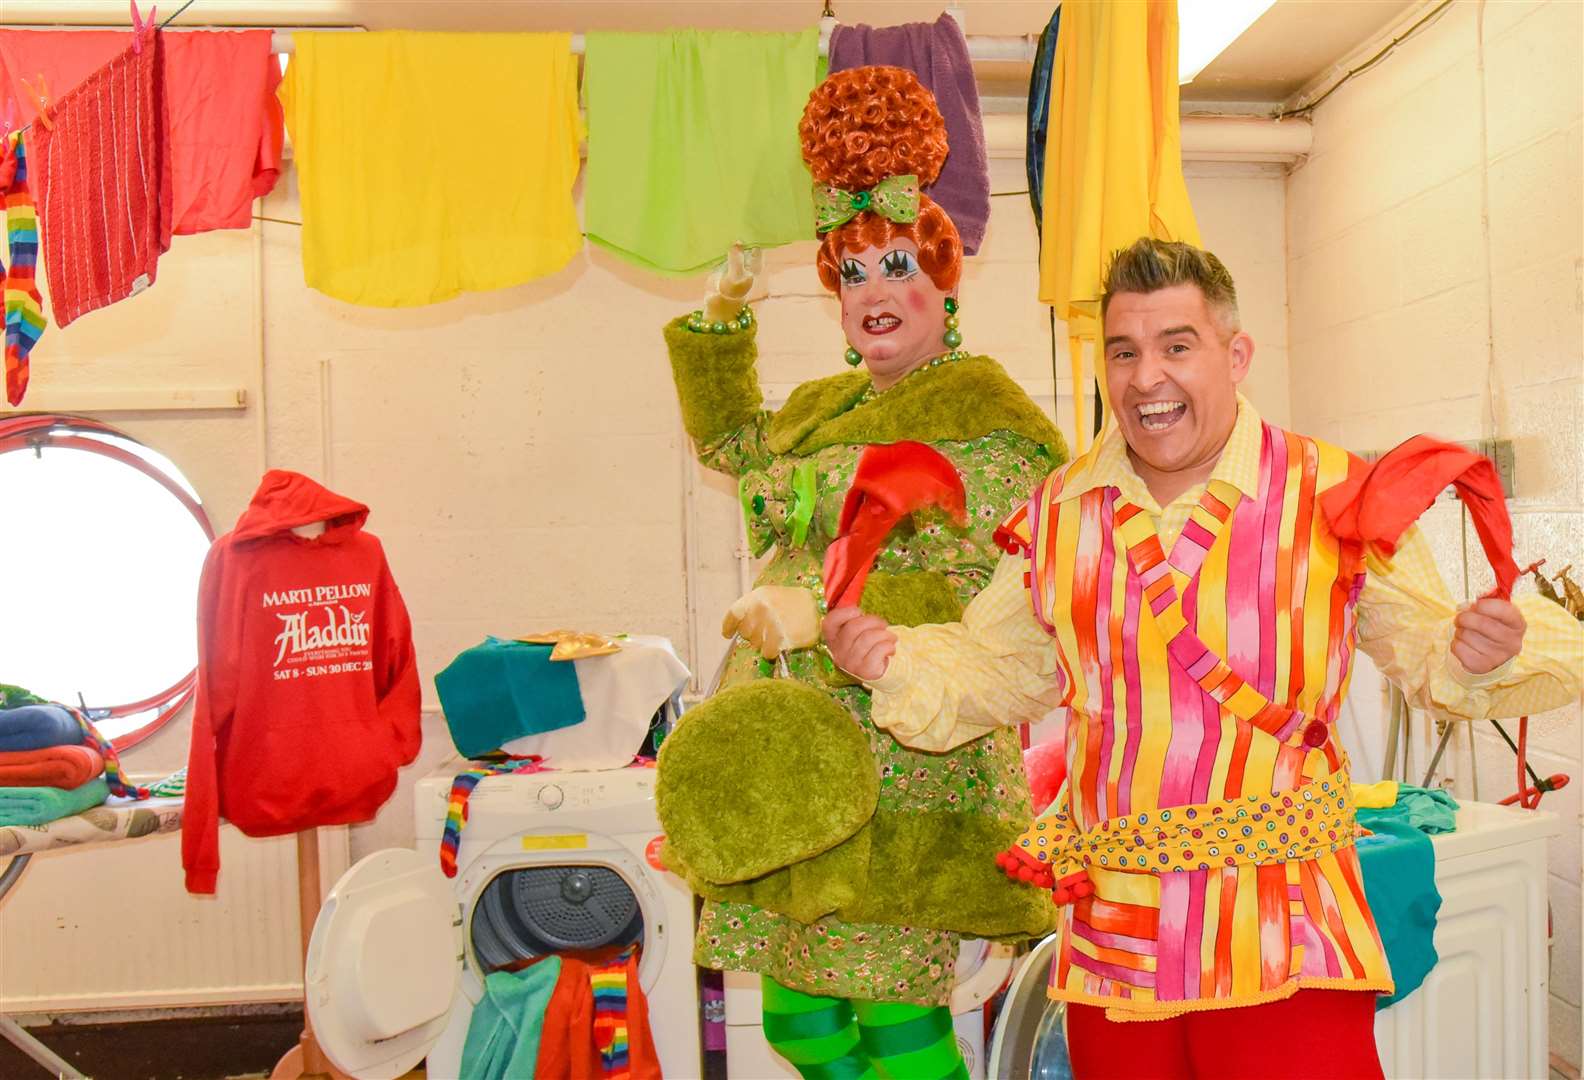 Ricky K and David Robbins in the laundry as part of Aladdin